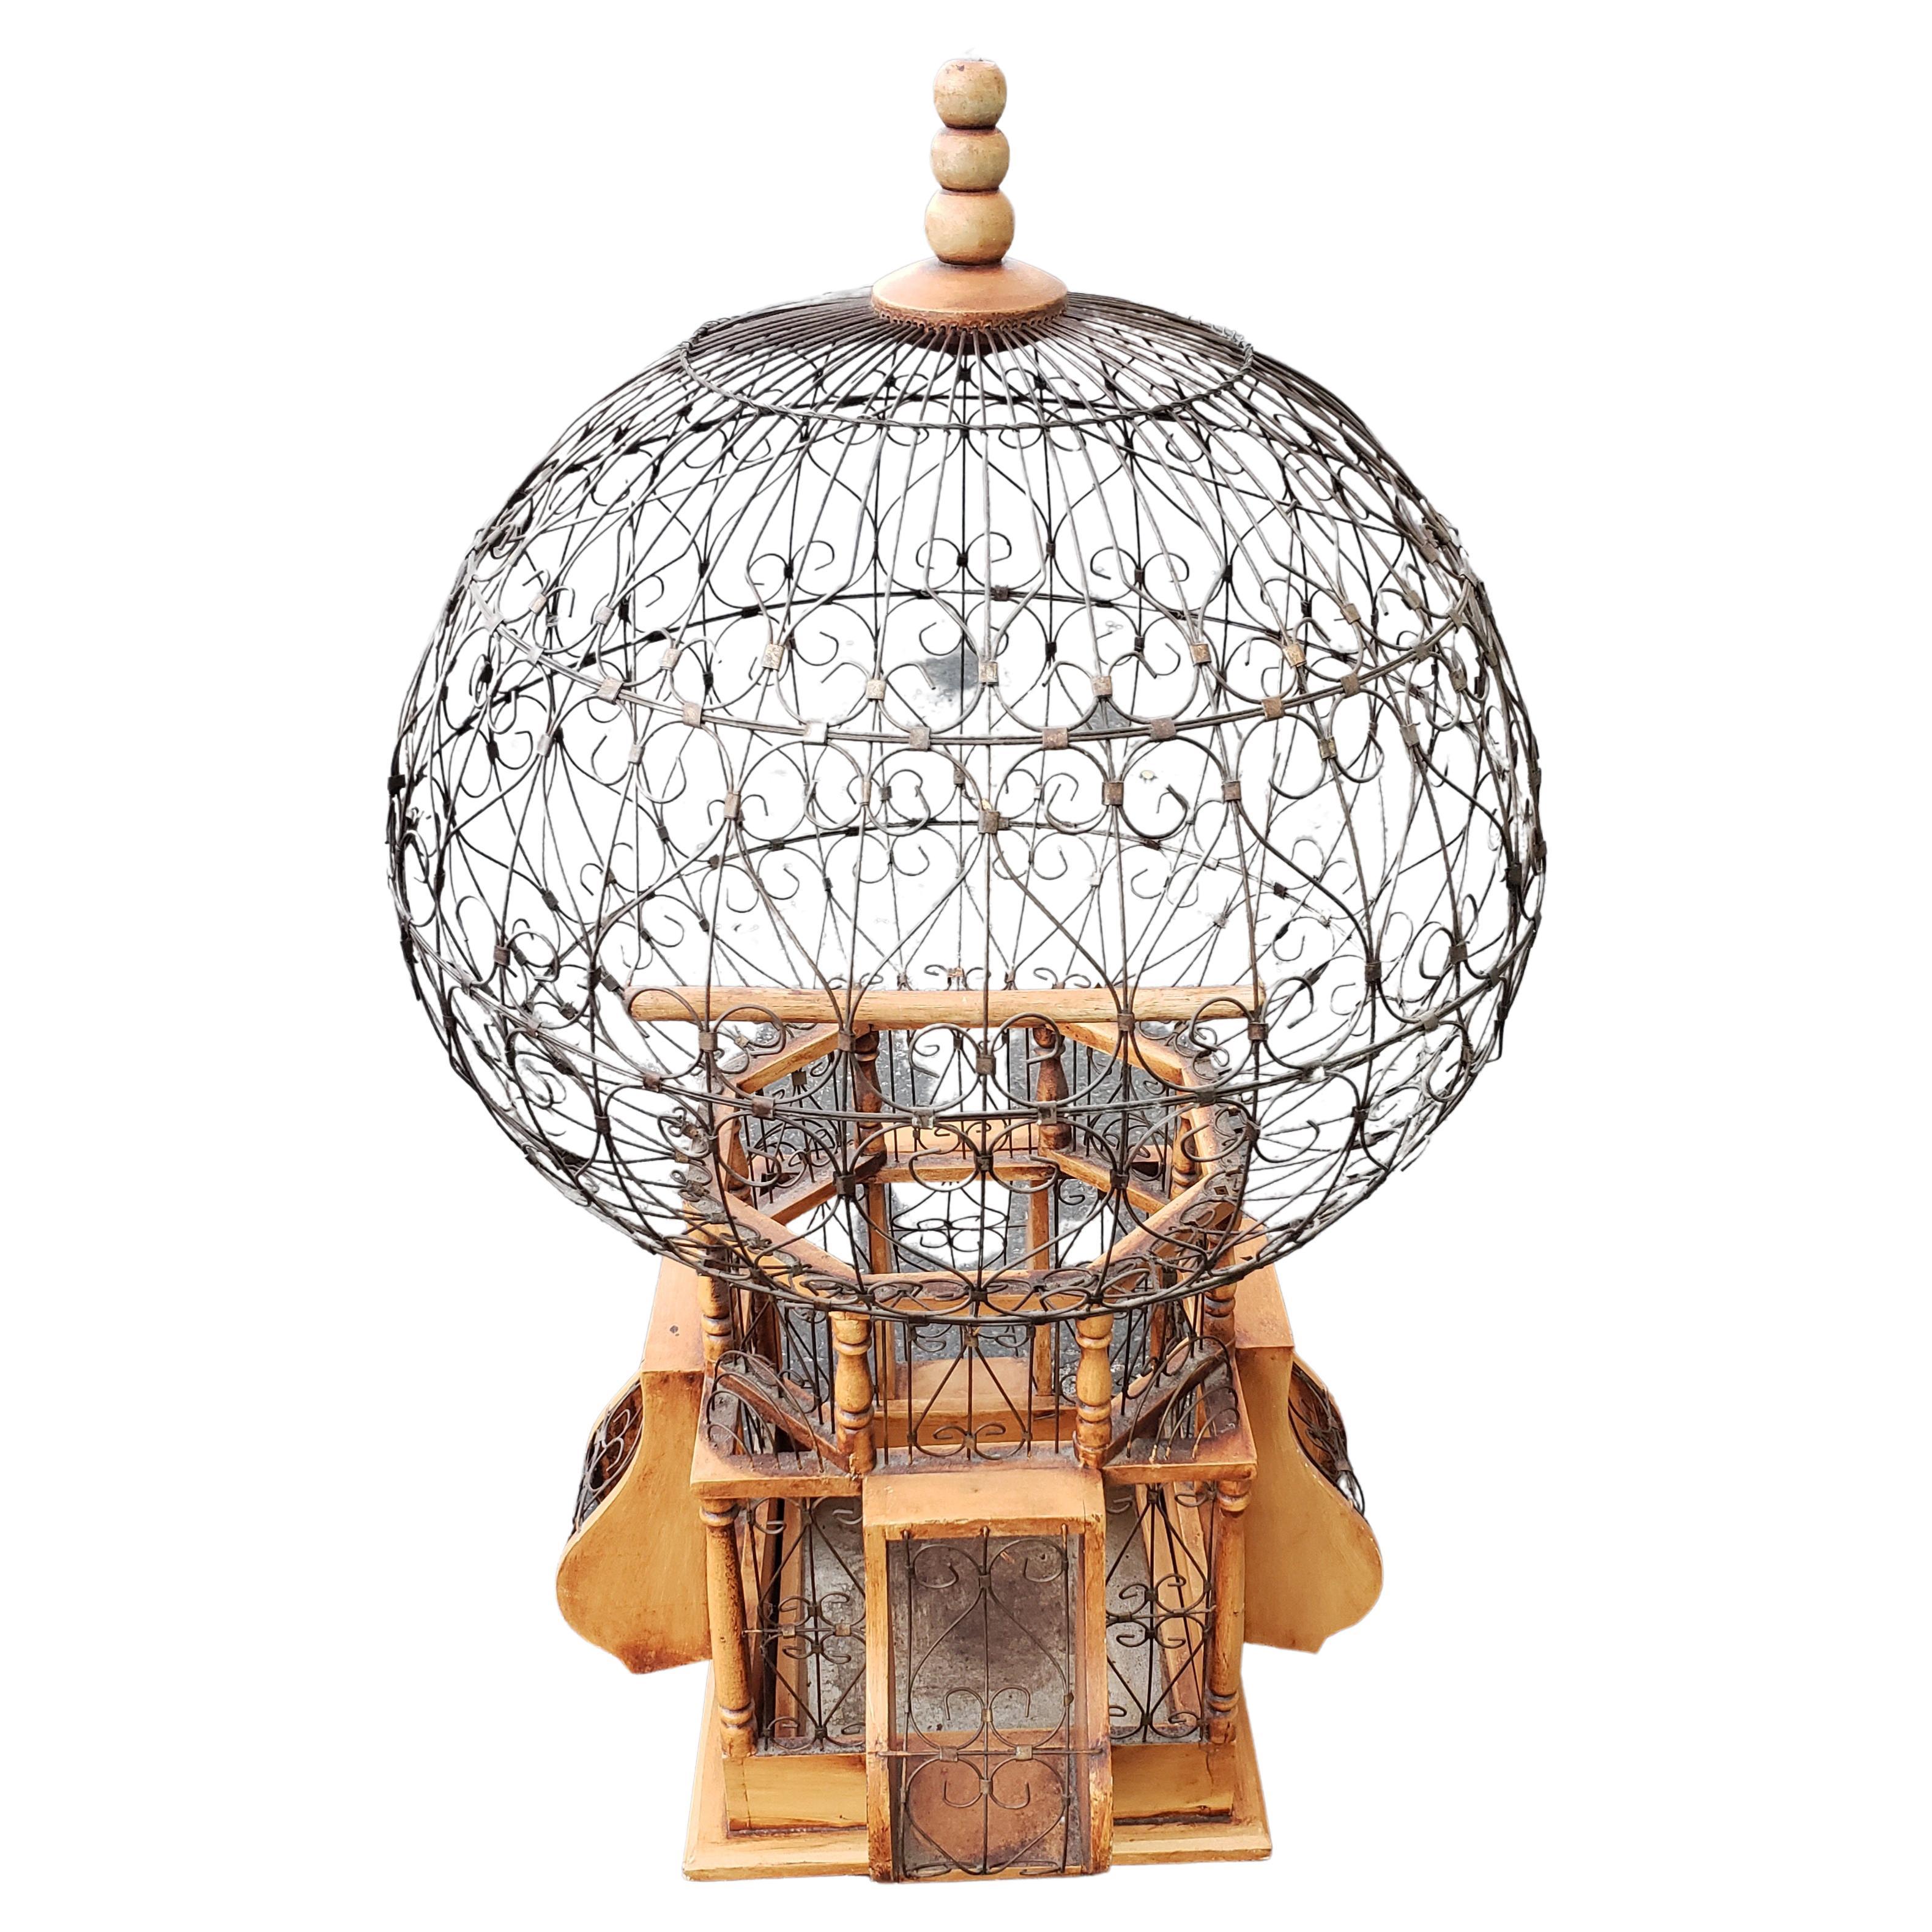 20th Century Victorian Style Wood and Iron "Balloon" Birdcage For Sale